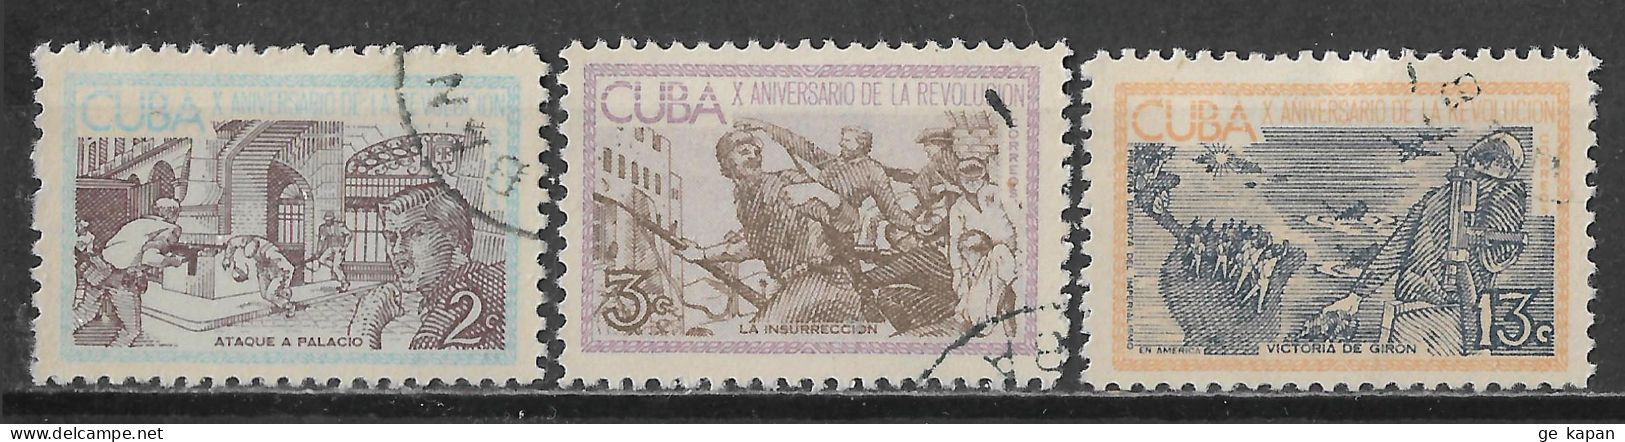 1963 CUBA SET OF 3 USED STAMPS (Michel # 853,854,858) CV €1.70 - Used Stamps